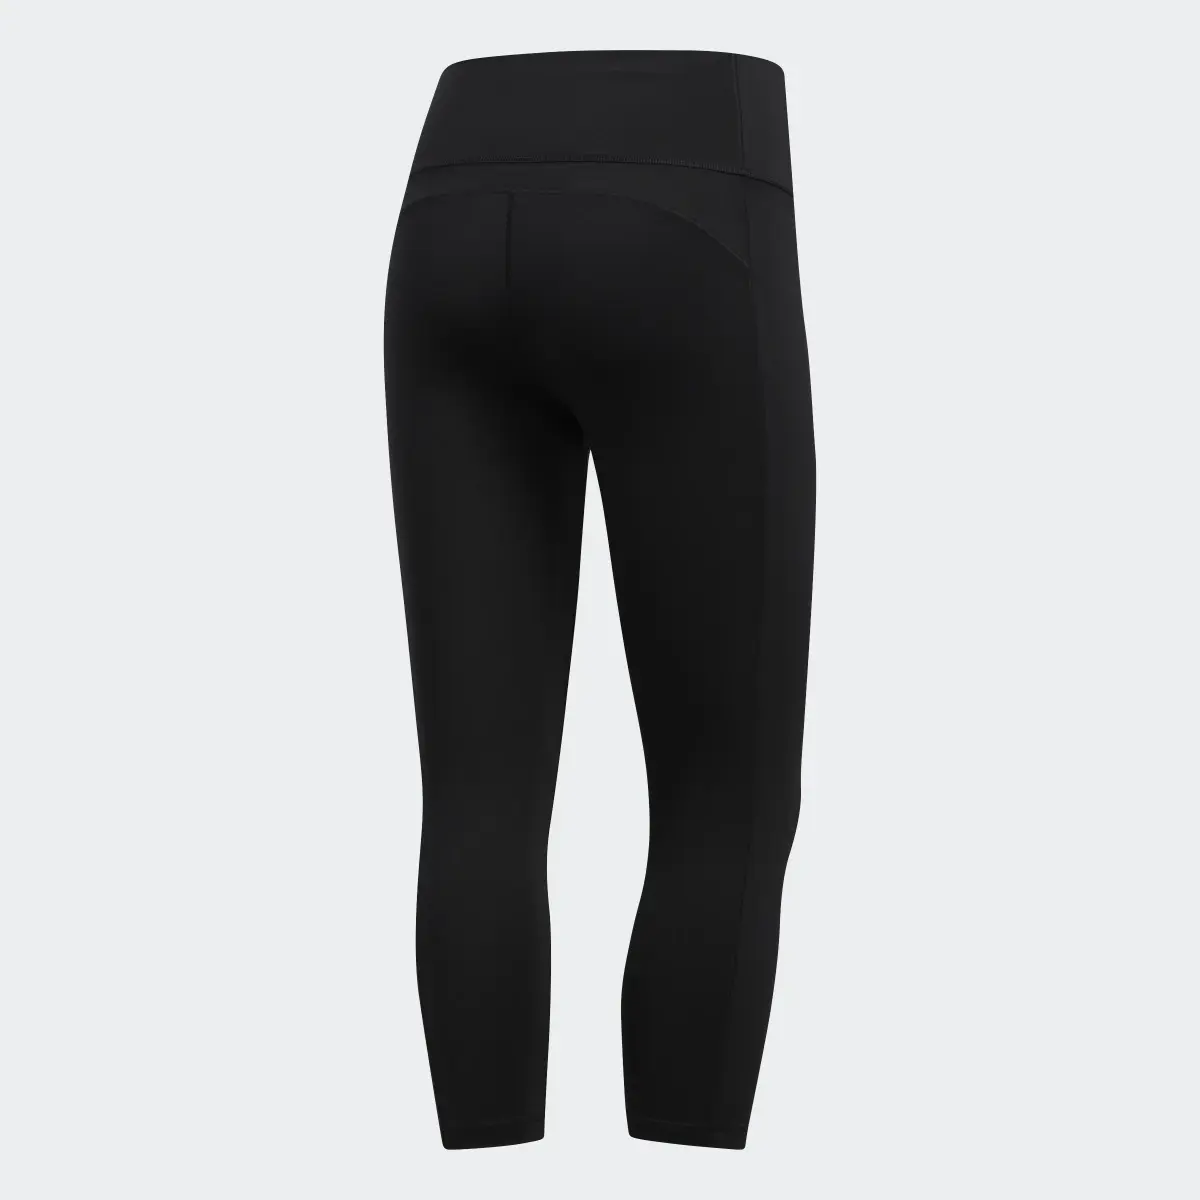 Adidas Believe This 2.0 3/4 Tights. 2